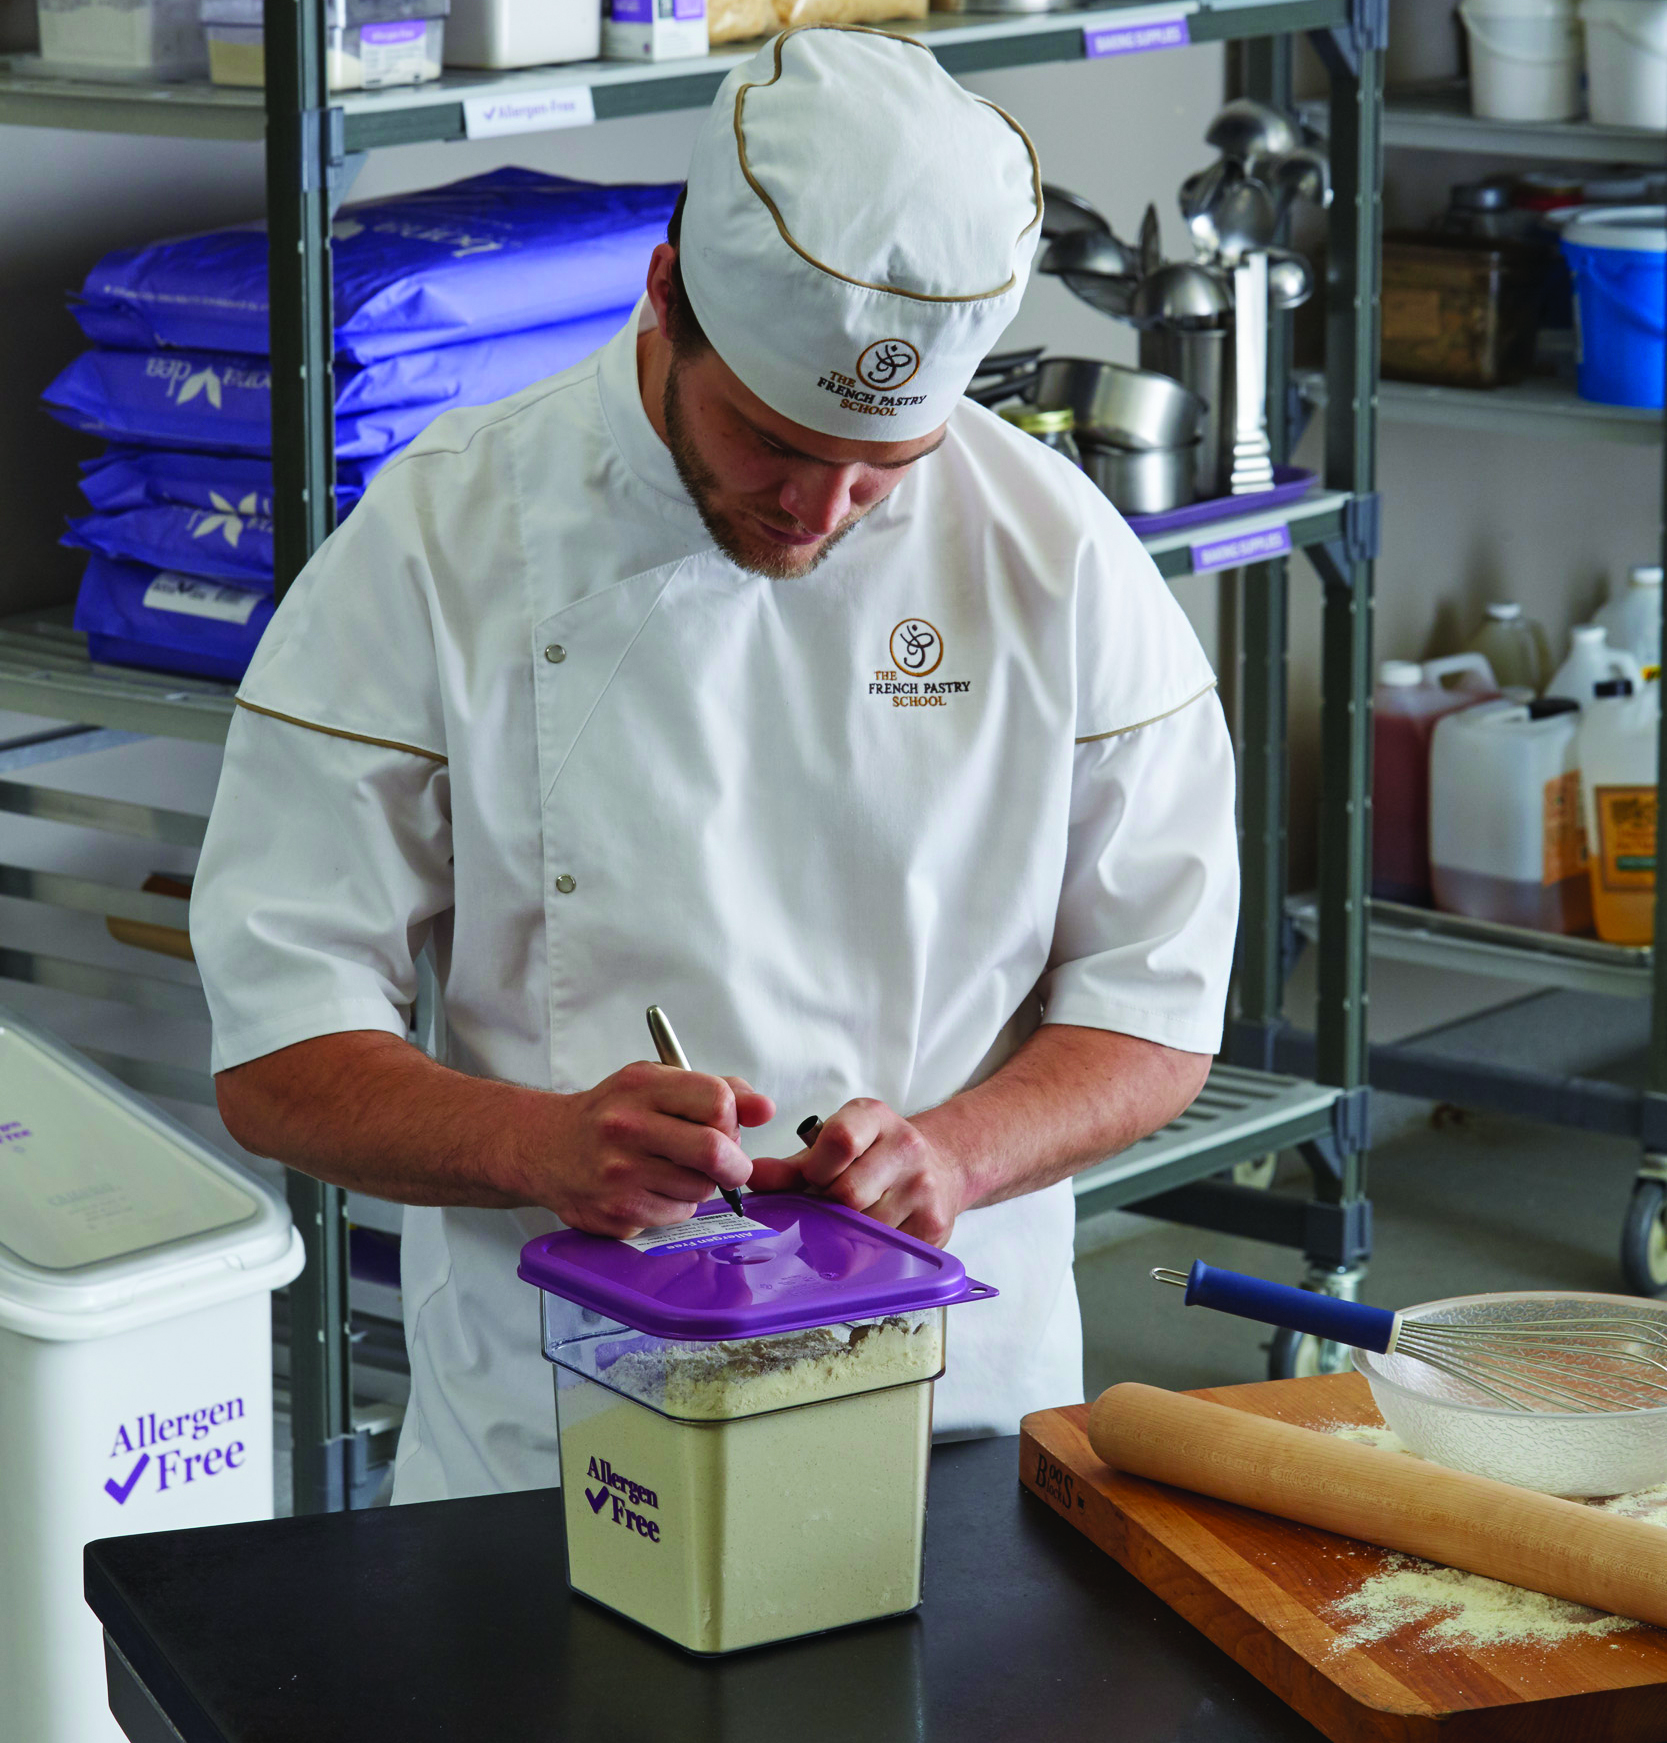 A chef writing on a StoreSafe label on top of a purple Allergen-Free CamSquare